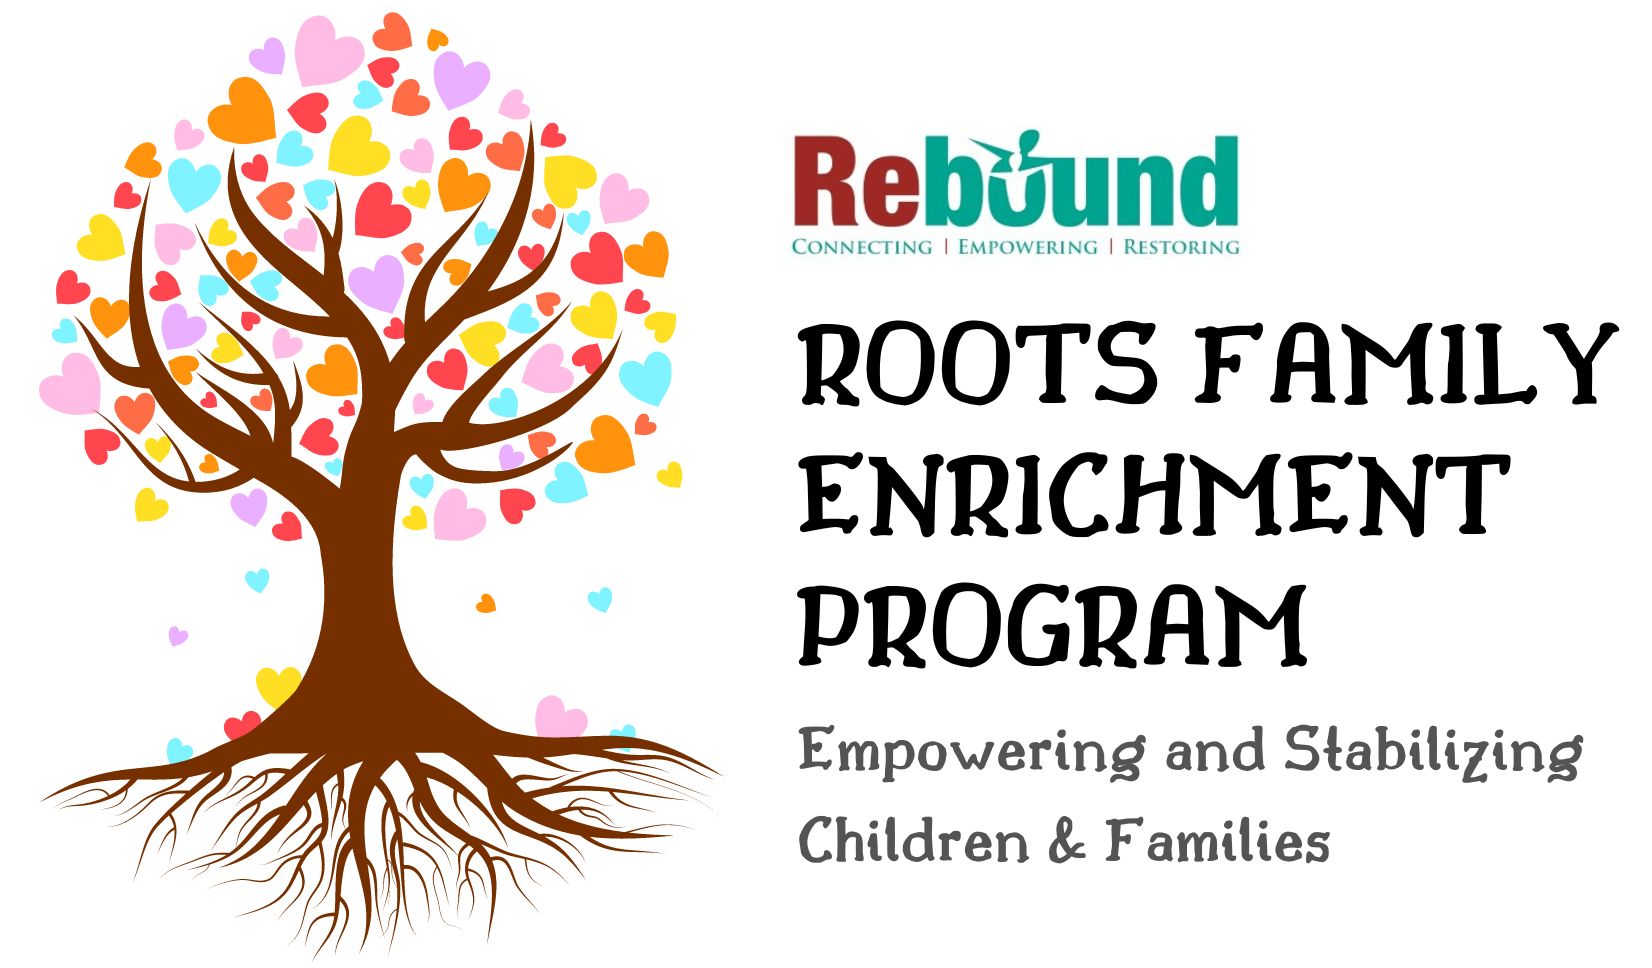 Rebound Roots Family Enrichment Program, Tree with Heart-shaped Leaves